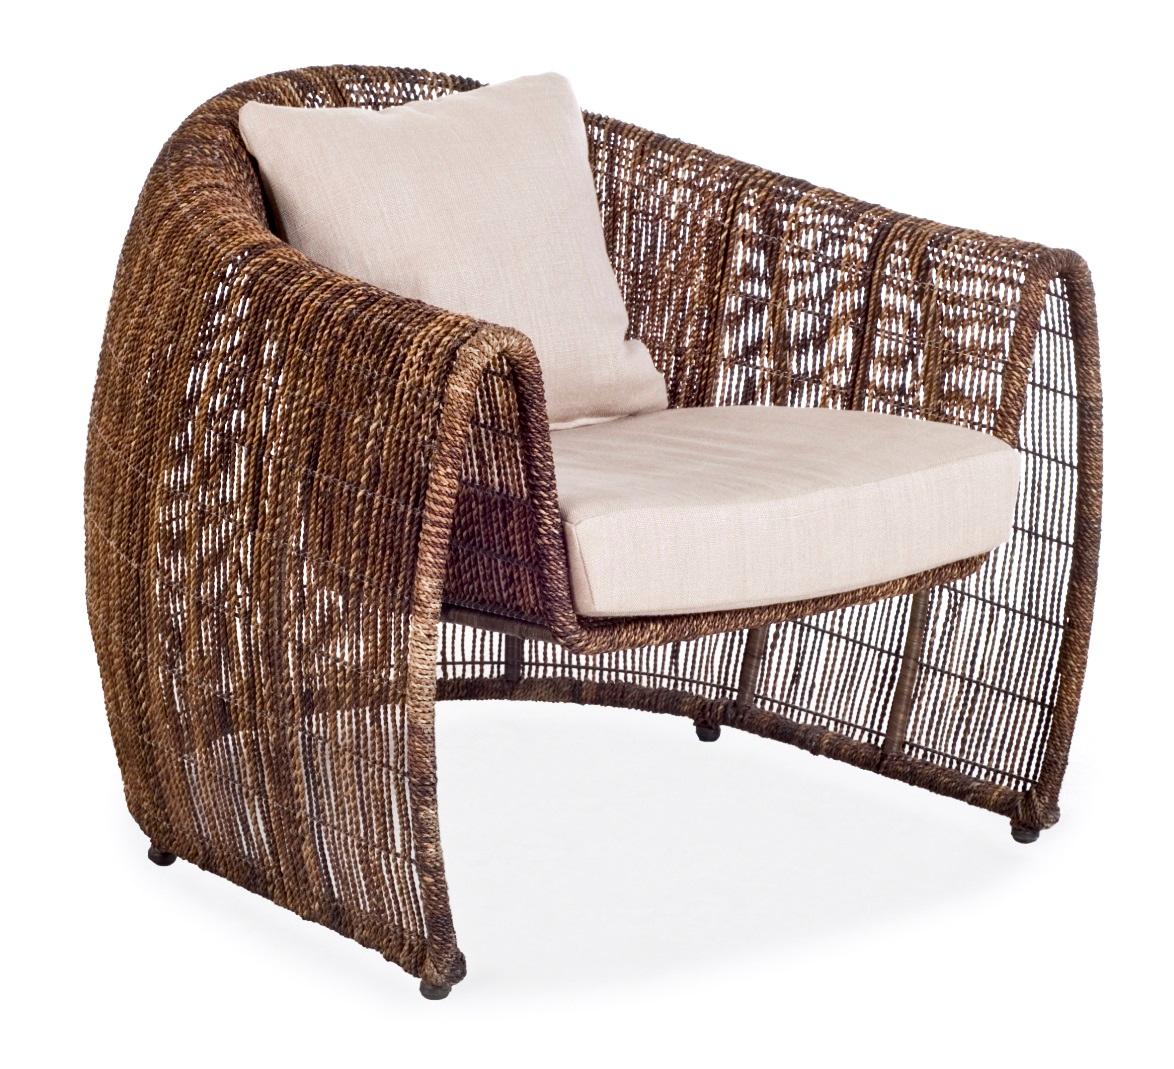 Indoor Lulu Easy armchair by Kenneth Cobonpue
Materials: Abaca, Nylon, Steel. 
Also available in other colors and for outdoors.
Dimensions: 87.5 cm x 90 cm x H 76 cm

Lulu adds grace to any space with its clean, nest-like silhouette. Its open